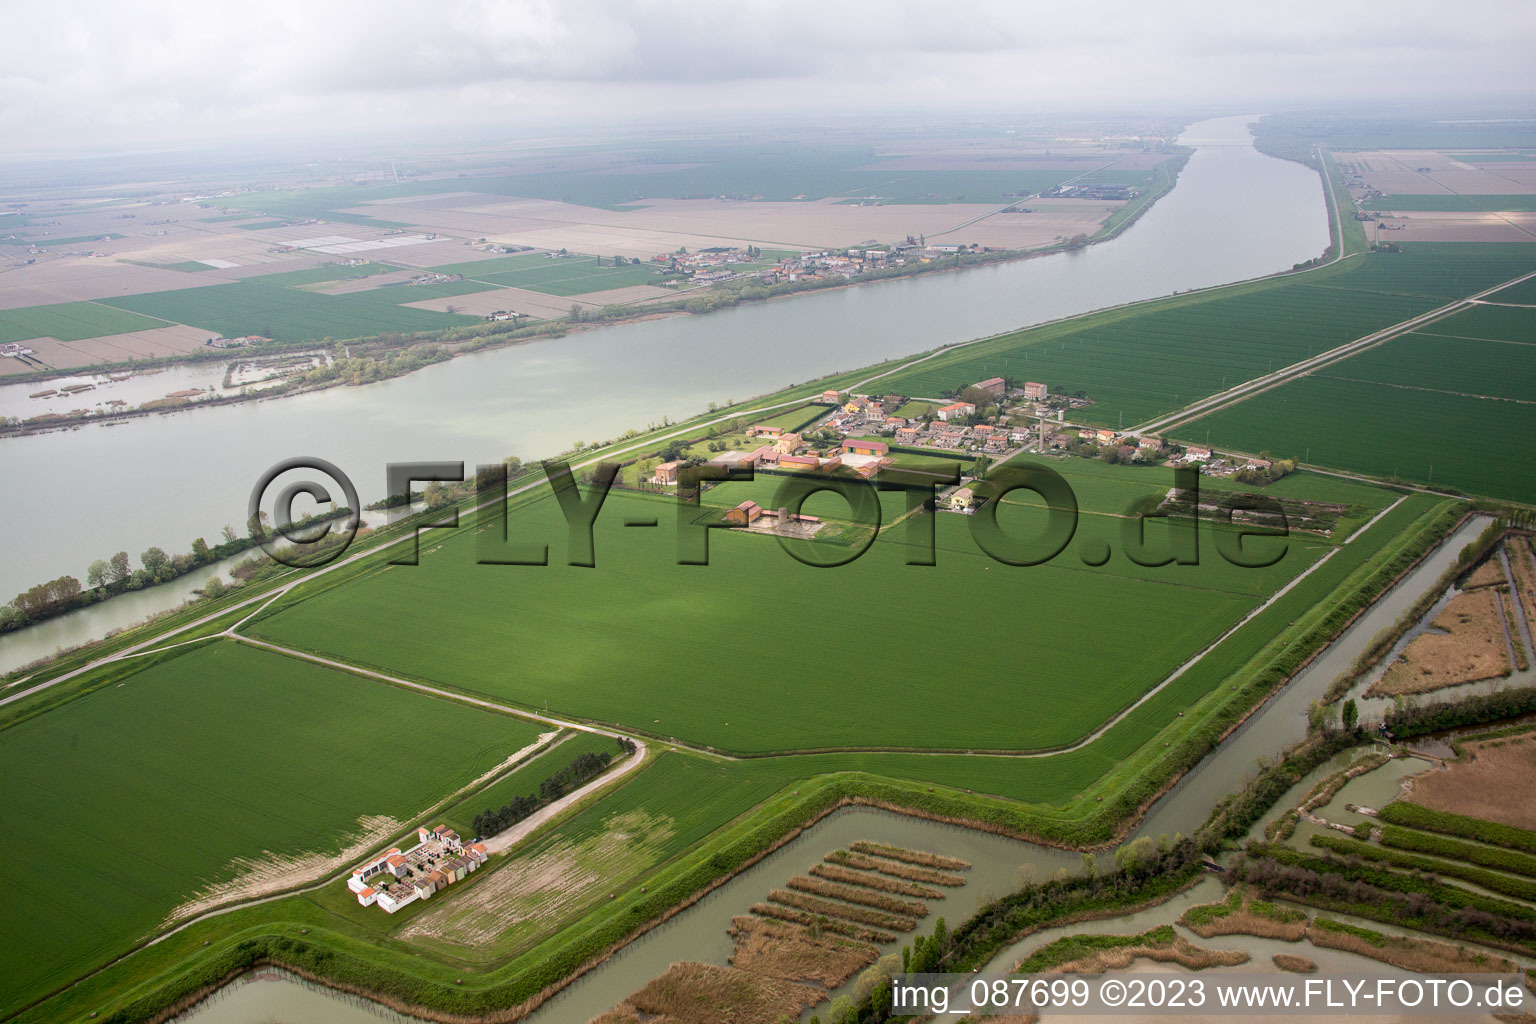 Aerial photograpy of Ca' Zuliani in the state Veneto, Italy